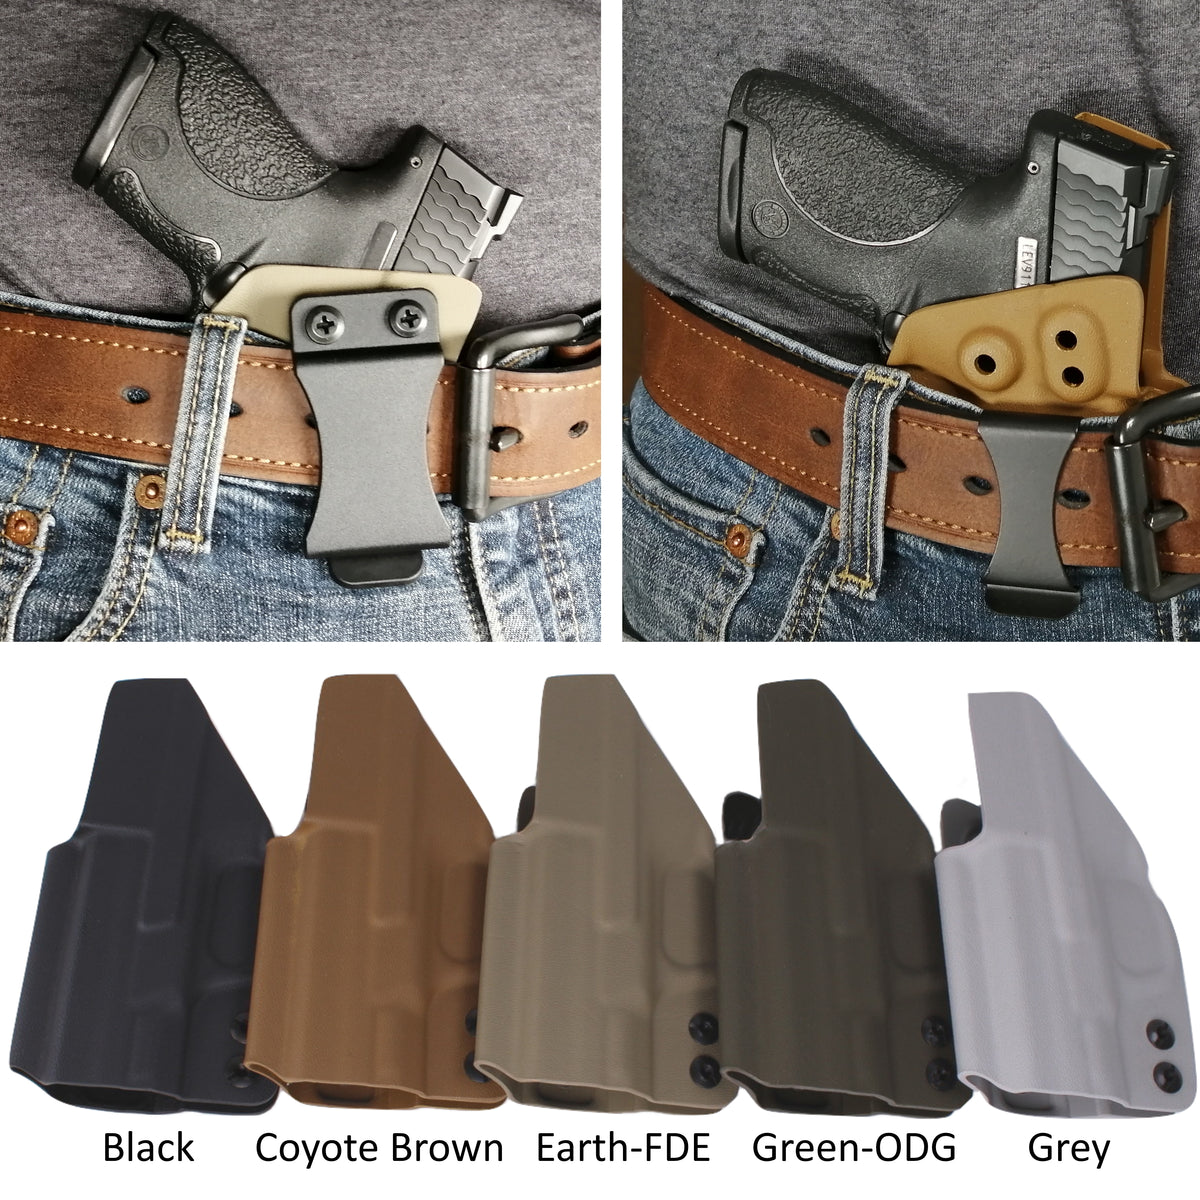 IWB Kydex Holster w/ Tuckable Clip & MOD Wing